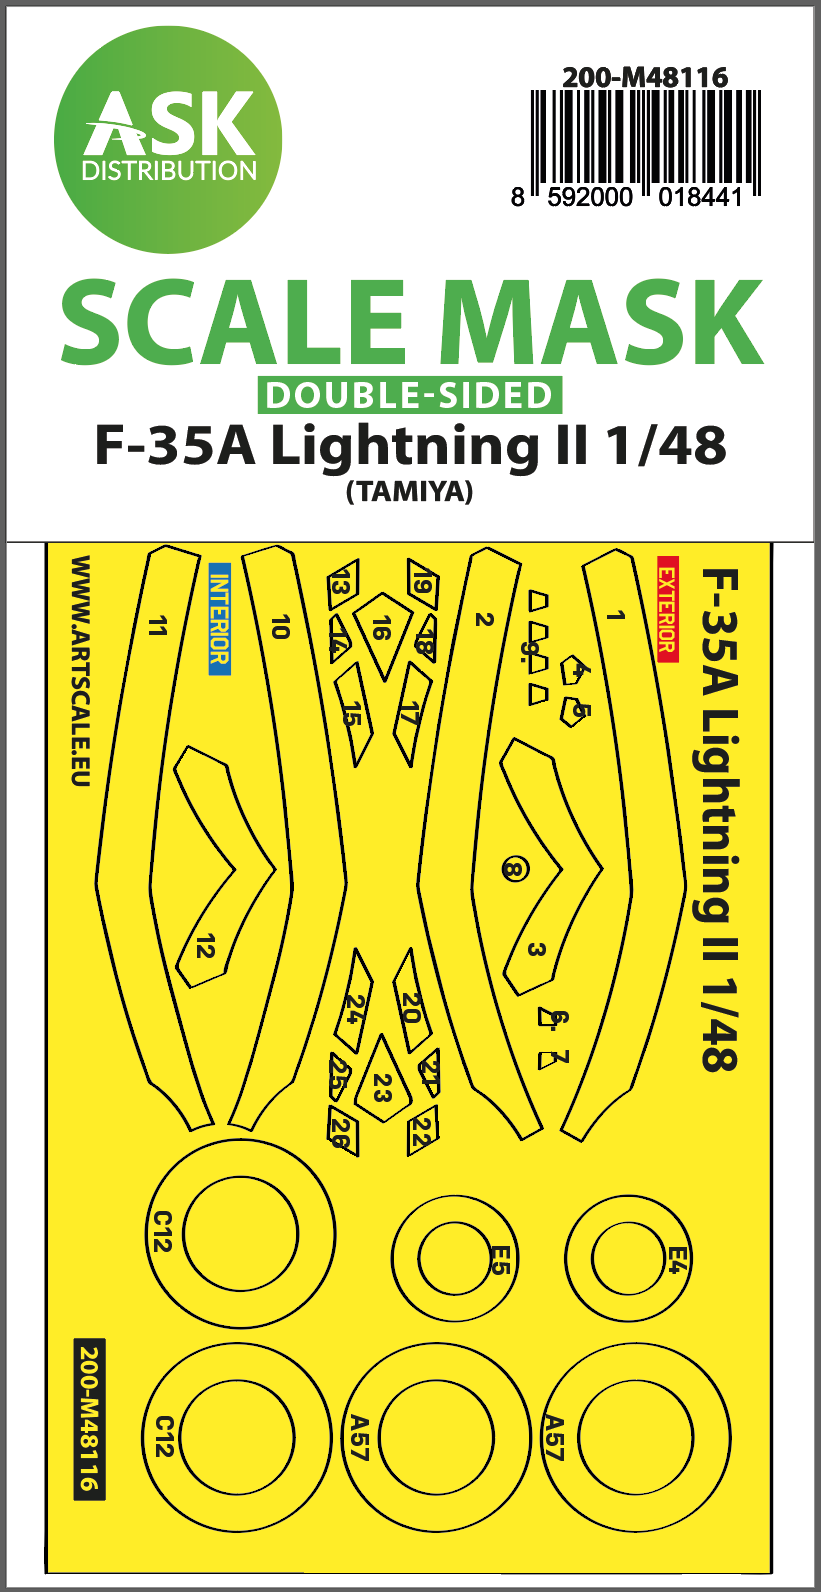 1/48 F-35A Lightning II double-sided express mask, self-adhesive and pre-cutted for Tamiya